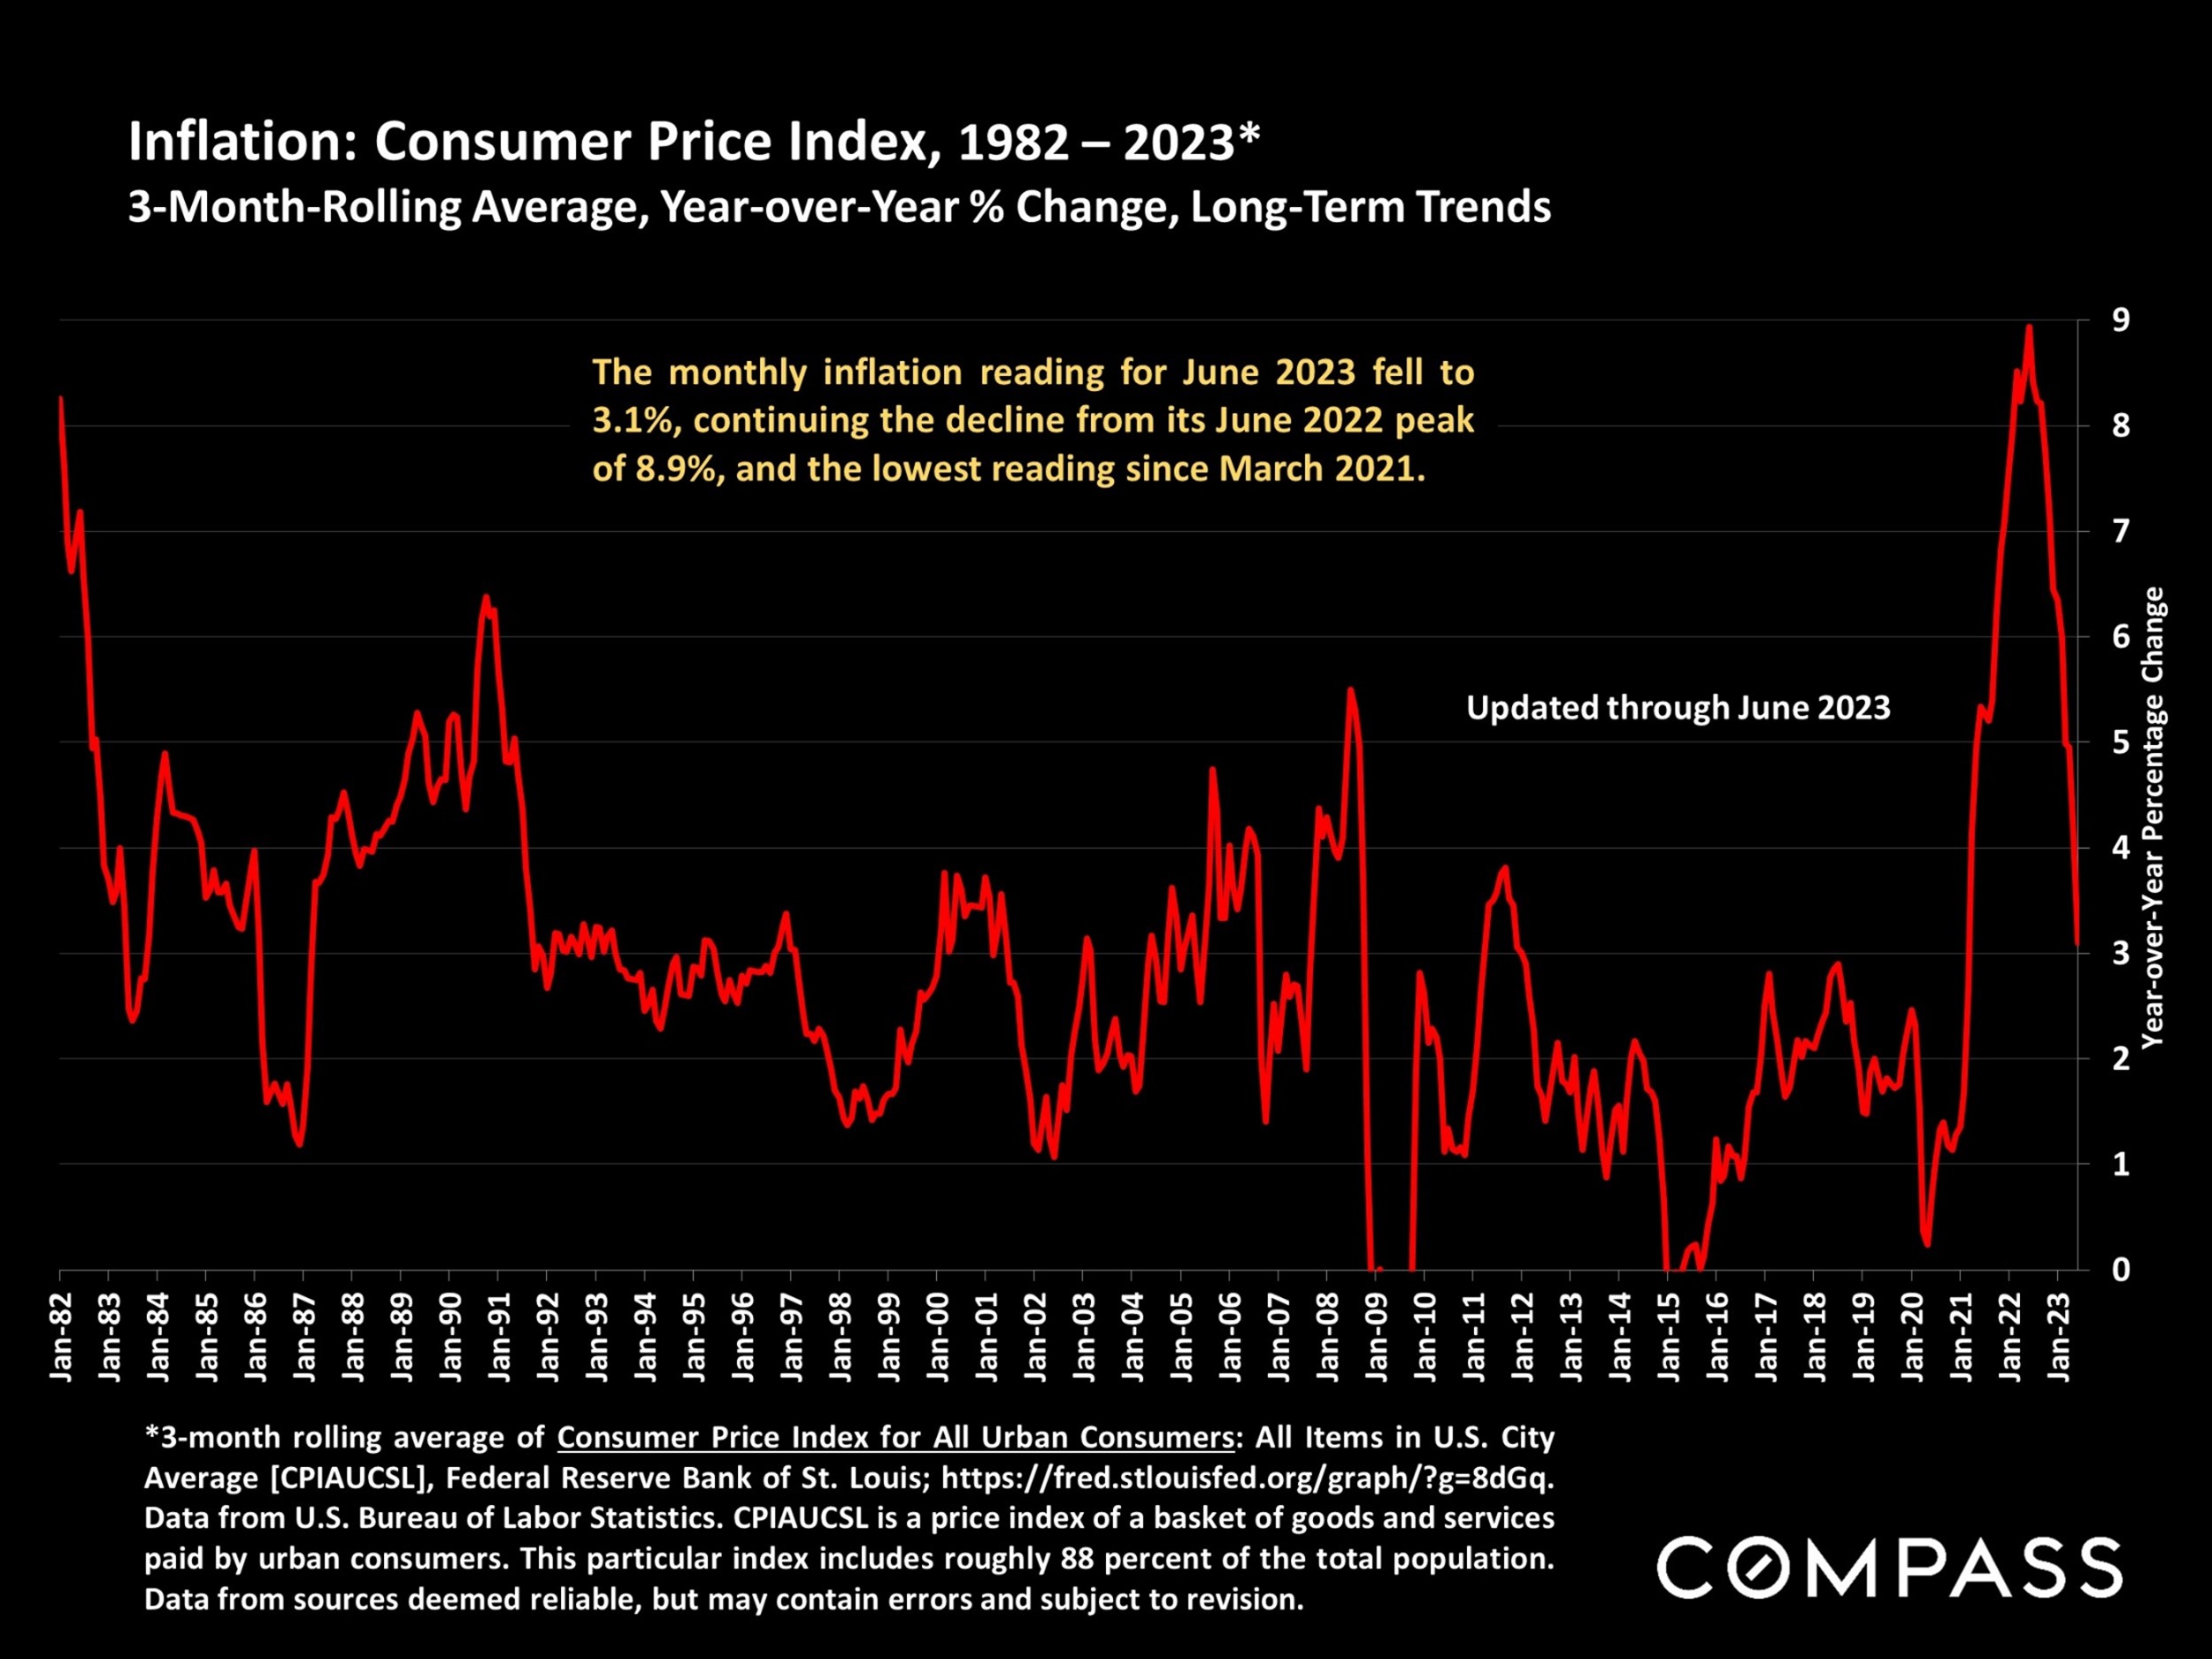 Inflation: Consumer Price Index, 1982 - 20233-Month-Rolling Average, Year-over-Year % Change, Long-Term Trends